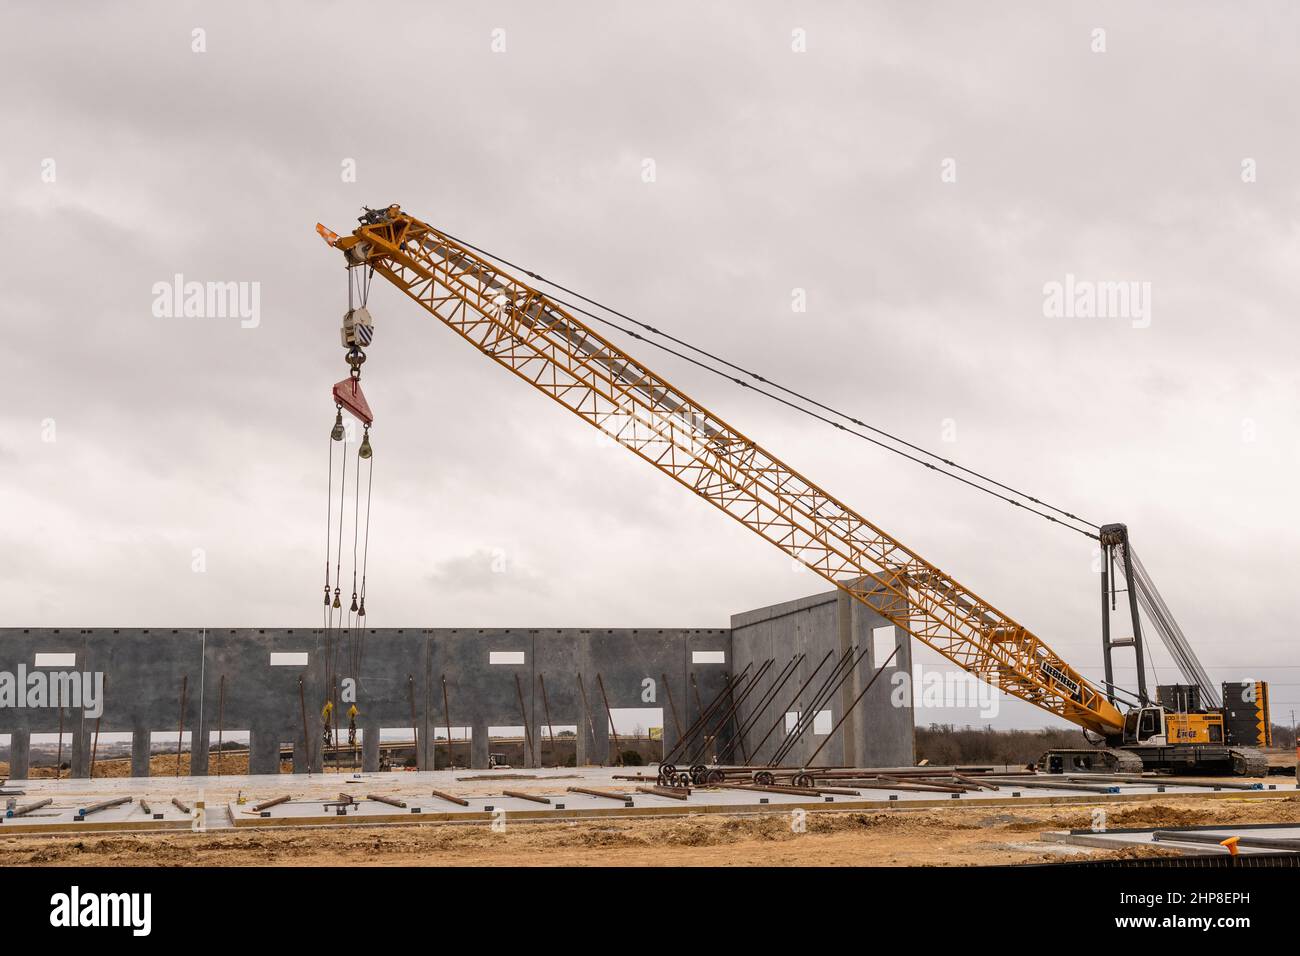 Large yellow mobile crane at construction site and used to lift large sections of prefabricated building walls into place Stock Photo